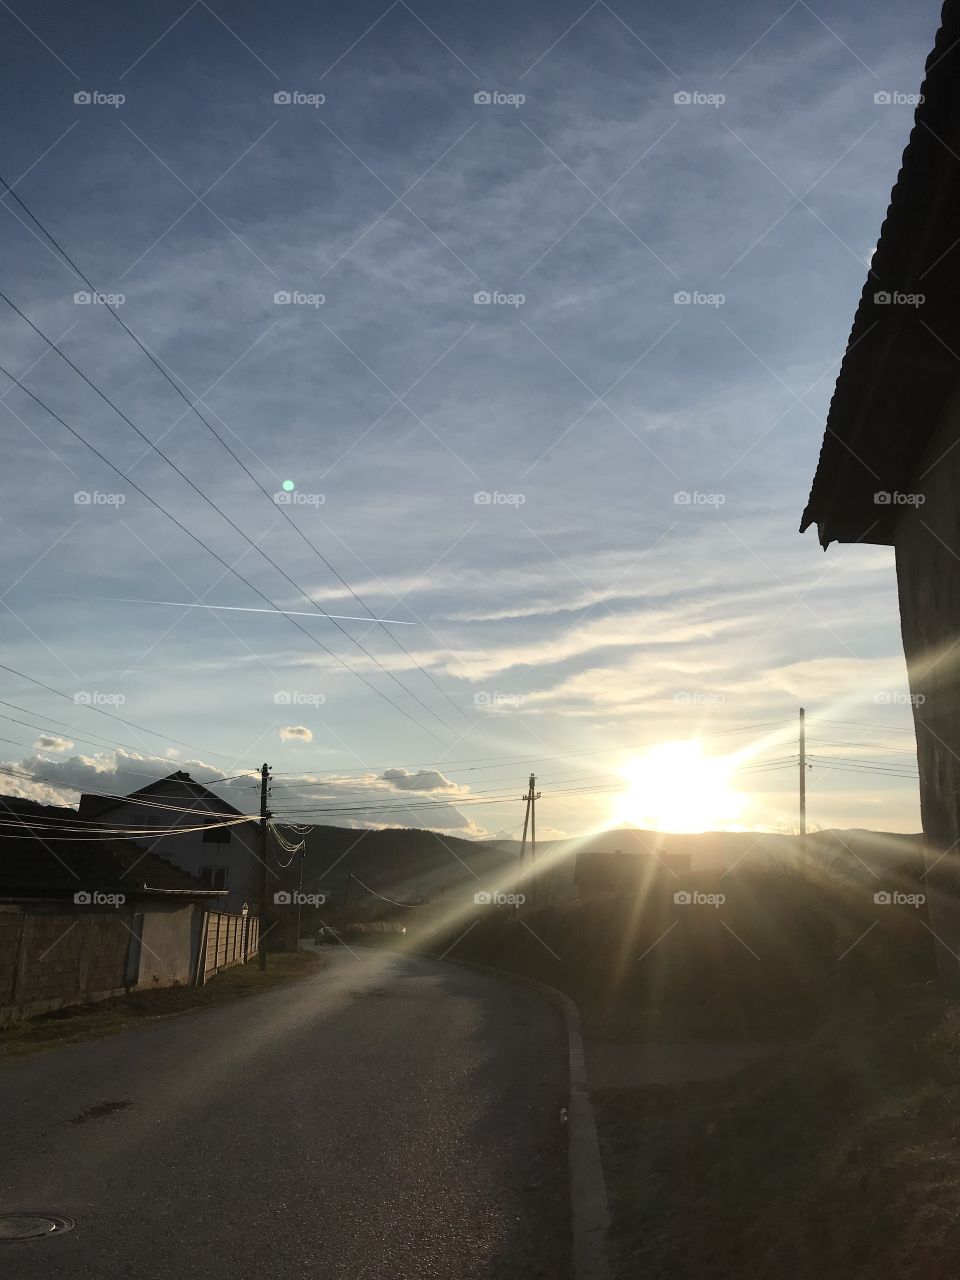 Sunset in Kosova.Children has gone inside,they played all day outside.It was a sunny day today.Spring is almost here.I am sure we are going to have a wonderful time together with friends and family.